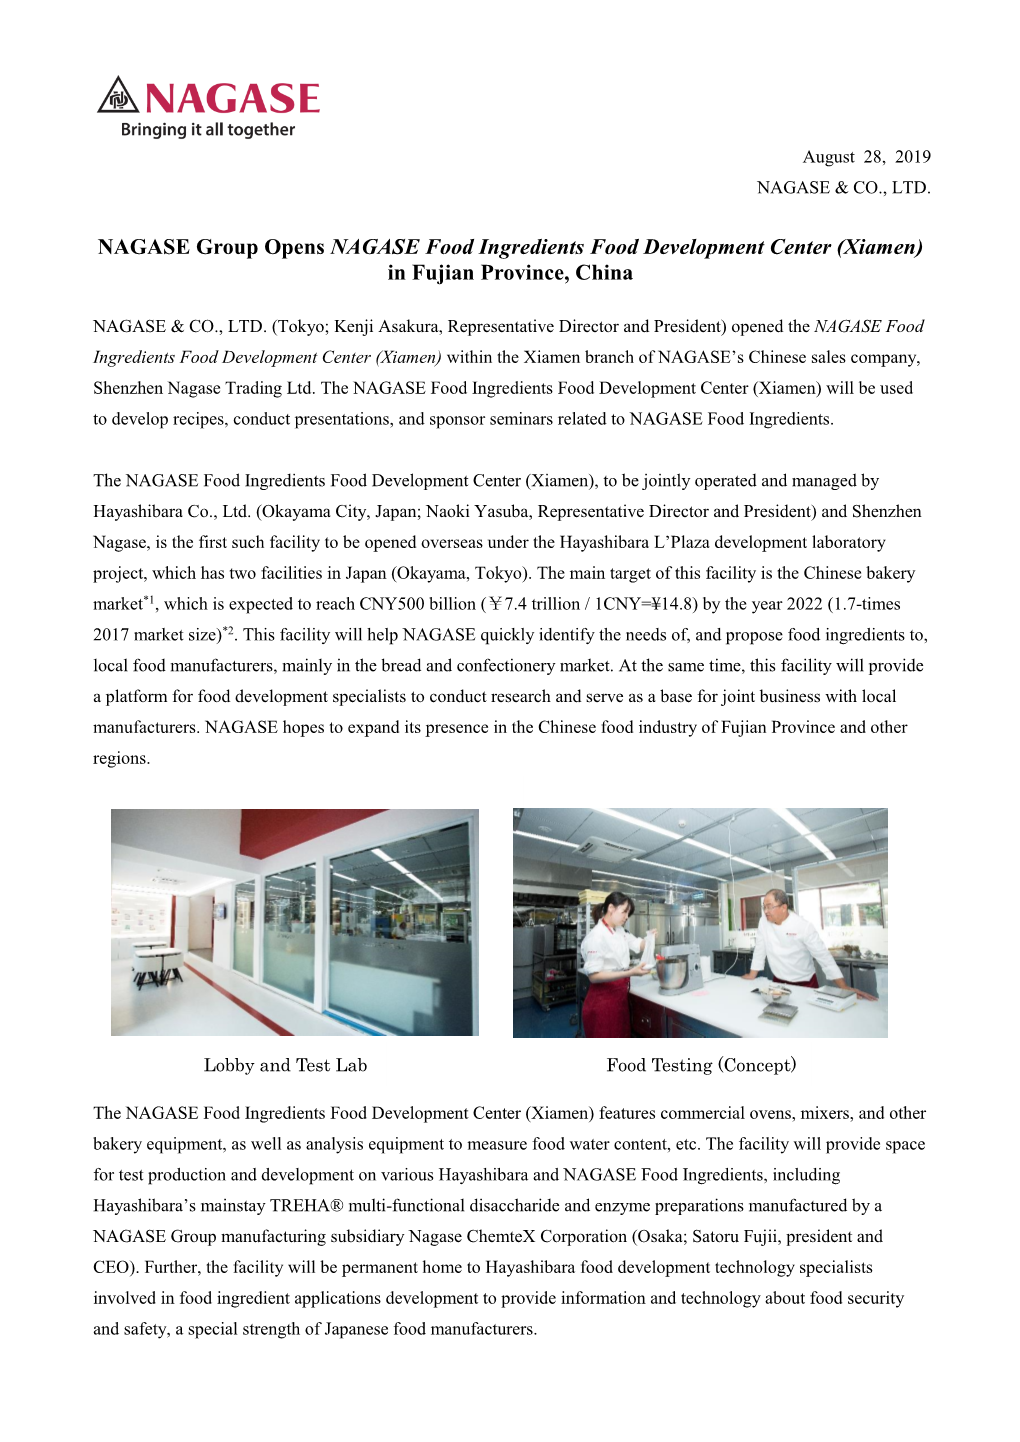 NAGASE Group Opens NAGASE Food Ingredients Food Development Center (Xiamen) in Fujian Province, China